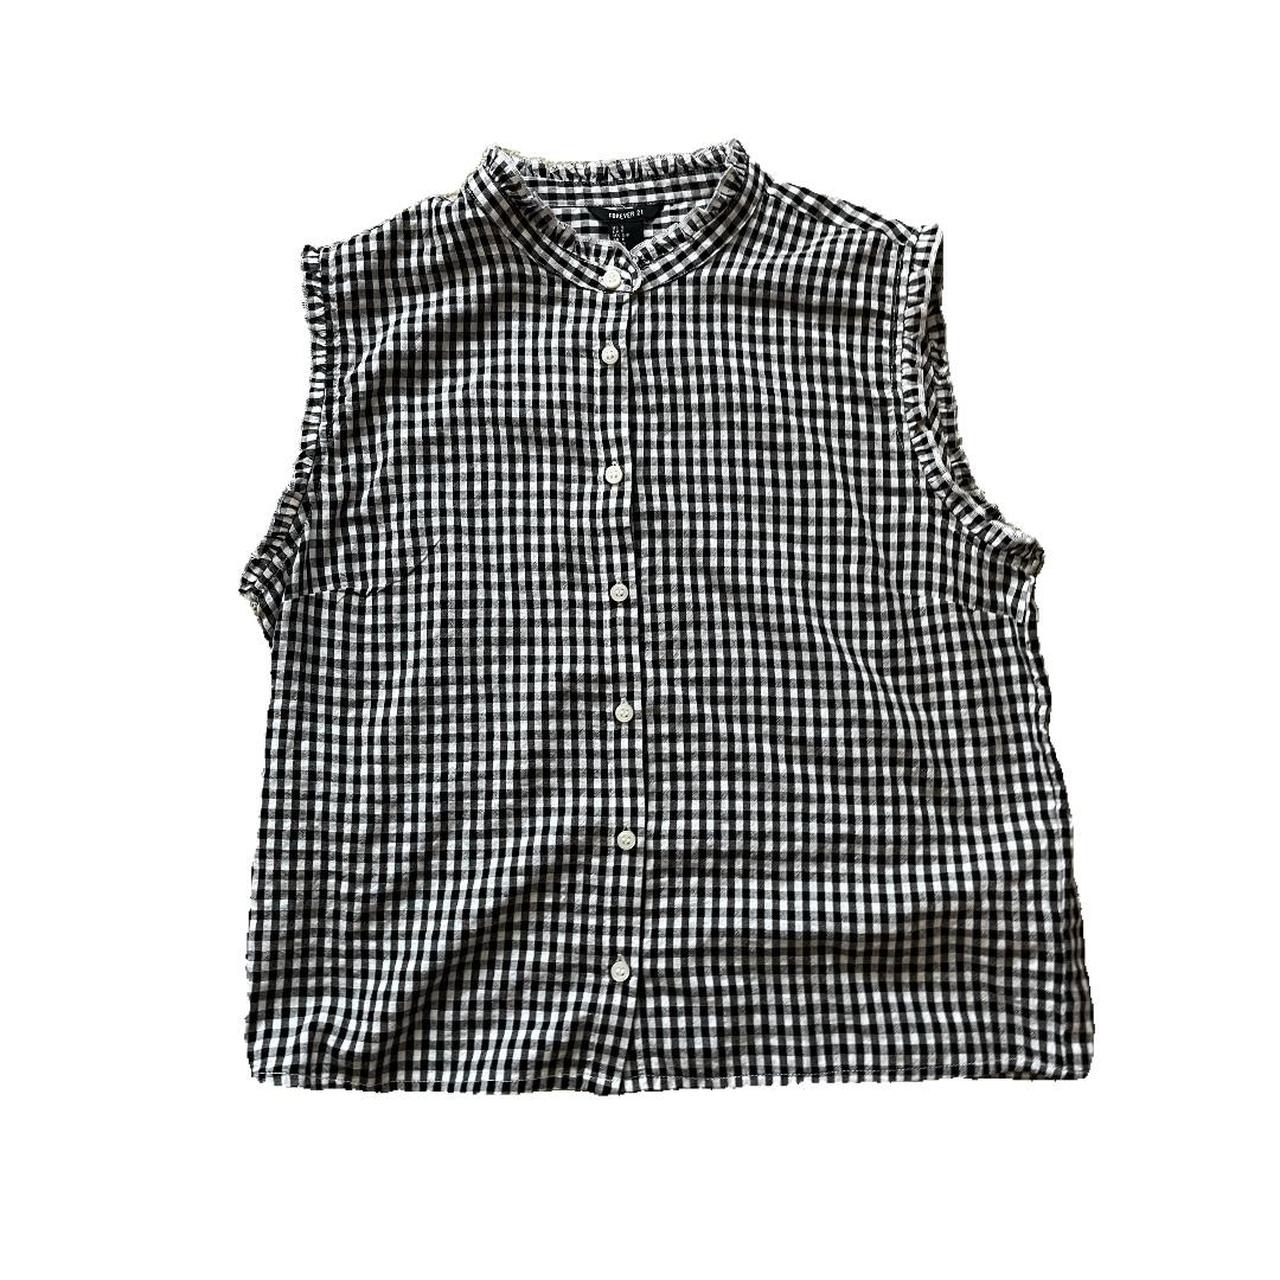 Black and White Gingham Sleeveless Top. Bought this... - Depop